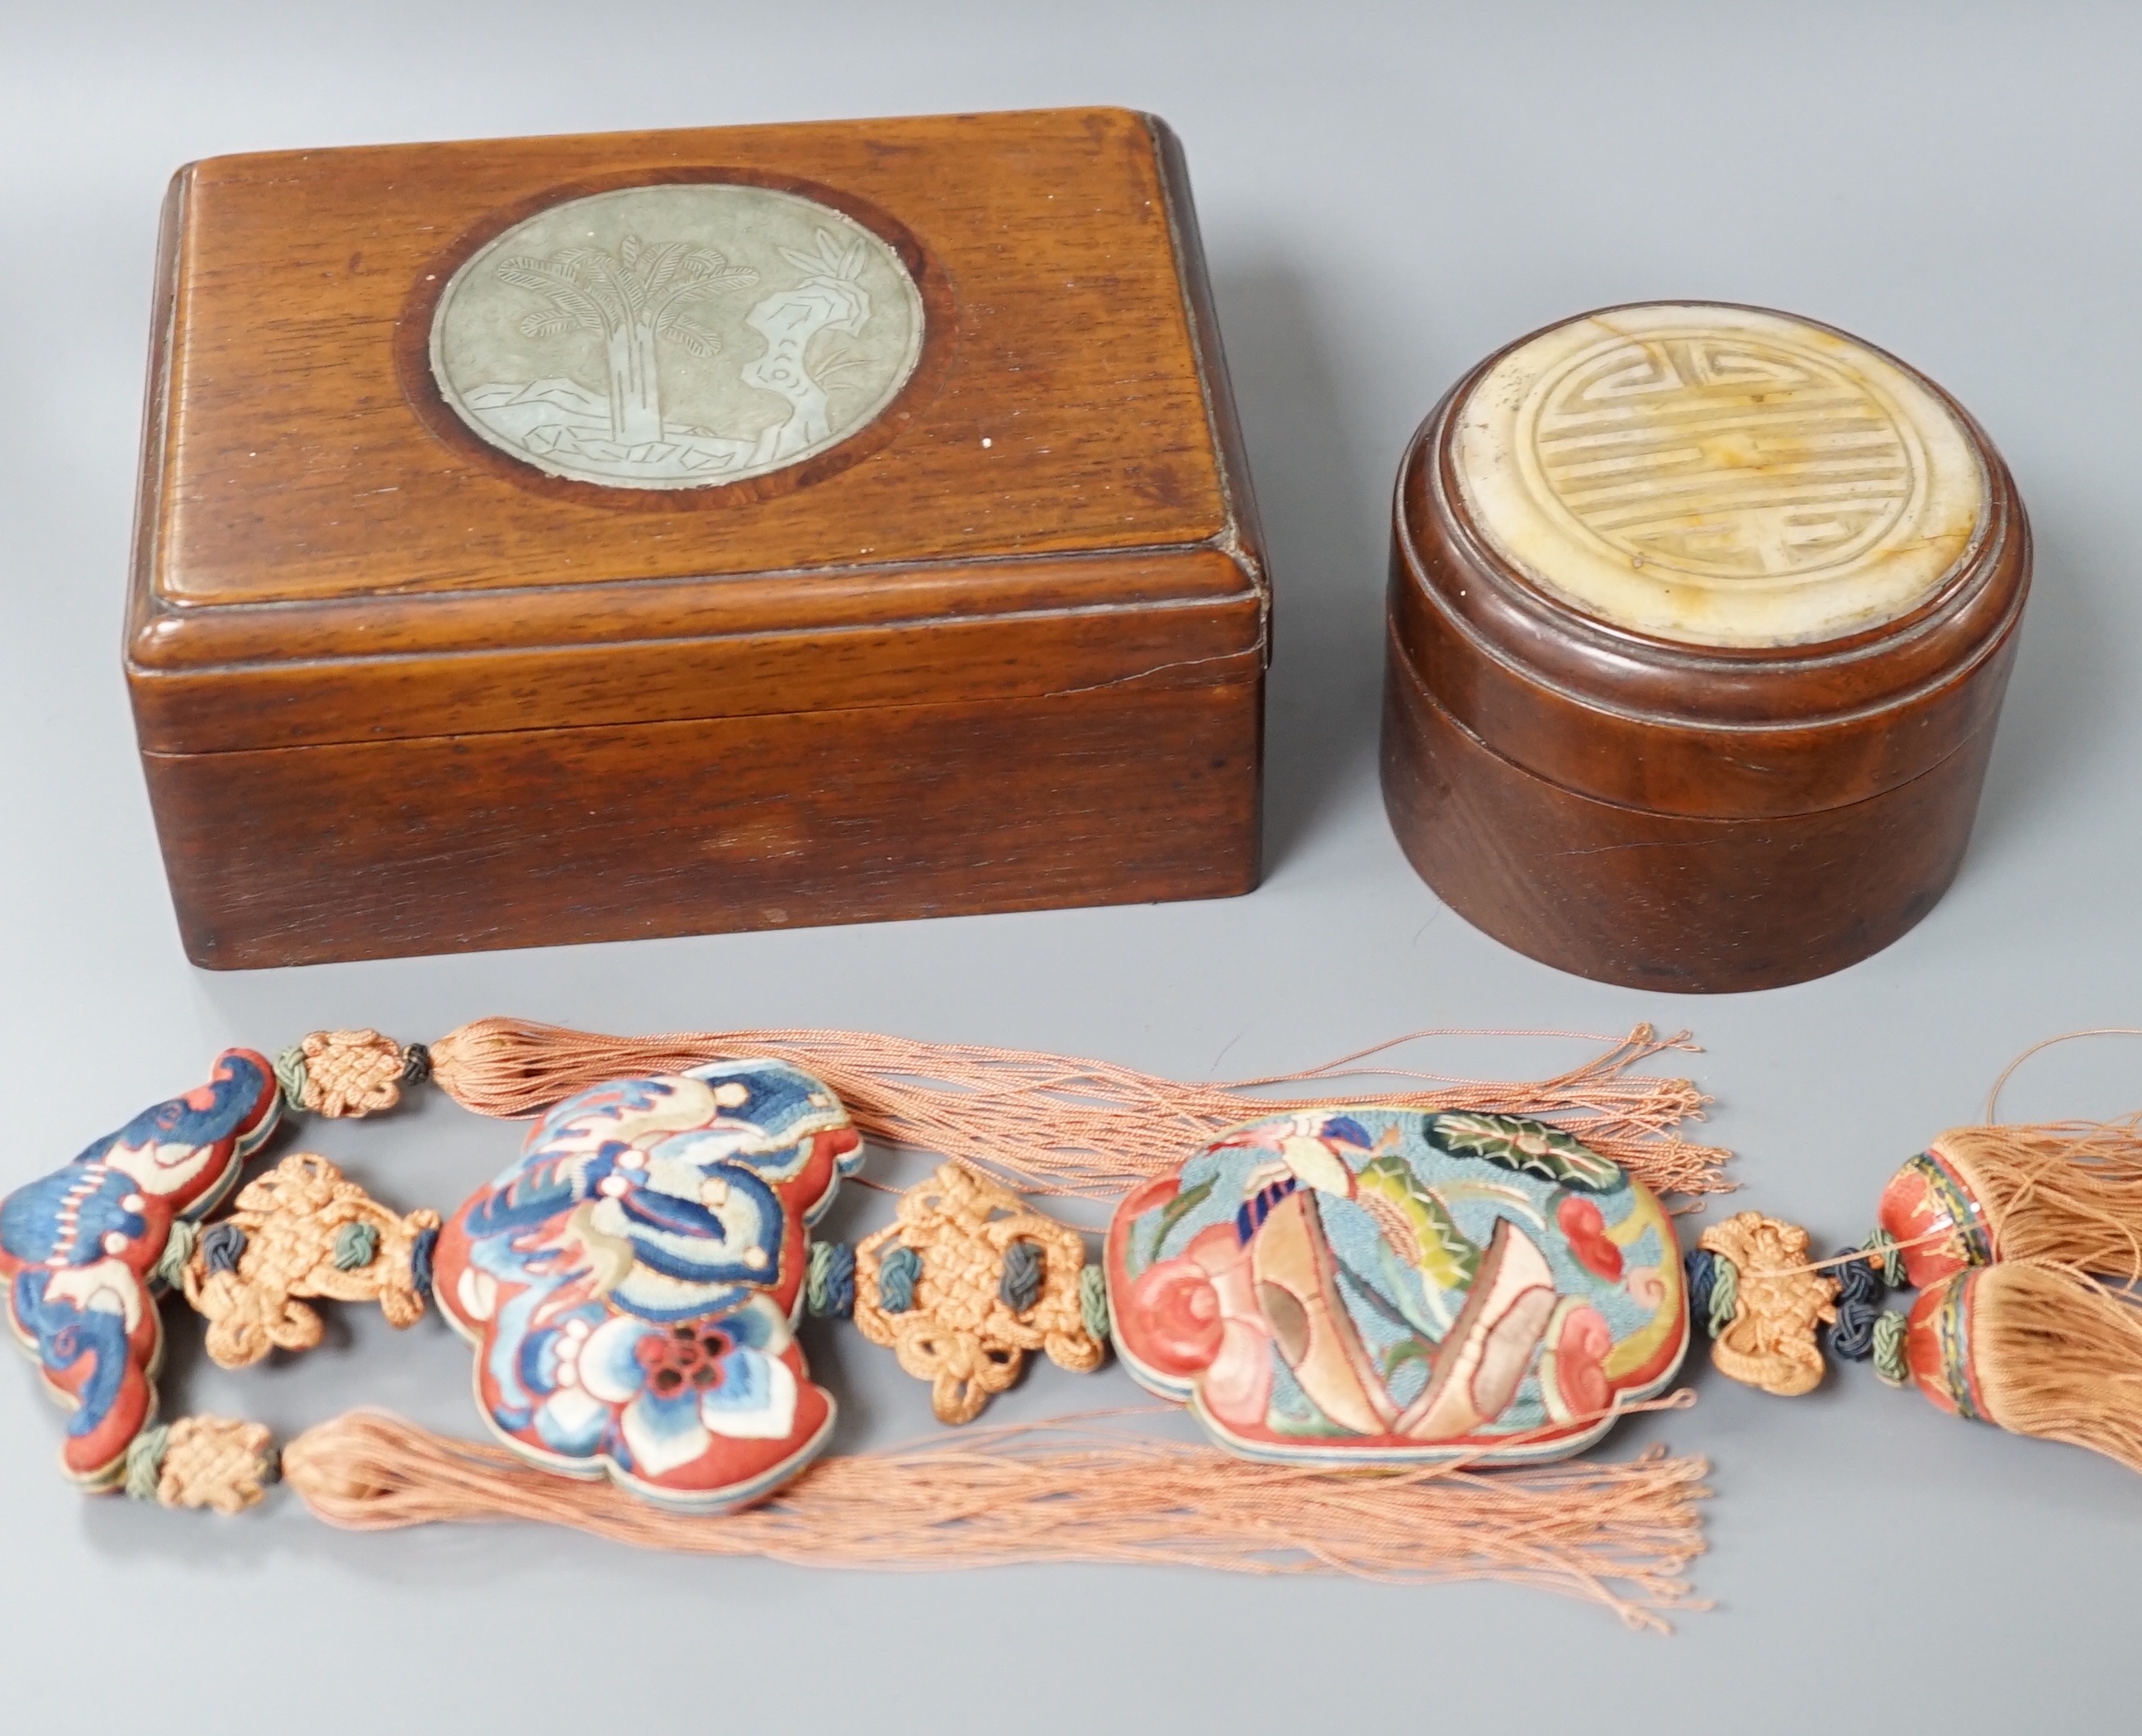 Two 19th century Chinese hardstone inset hardwood boxes and an embroidered amulet charm, largest box 12.5cm